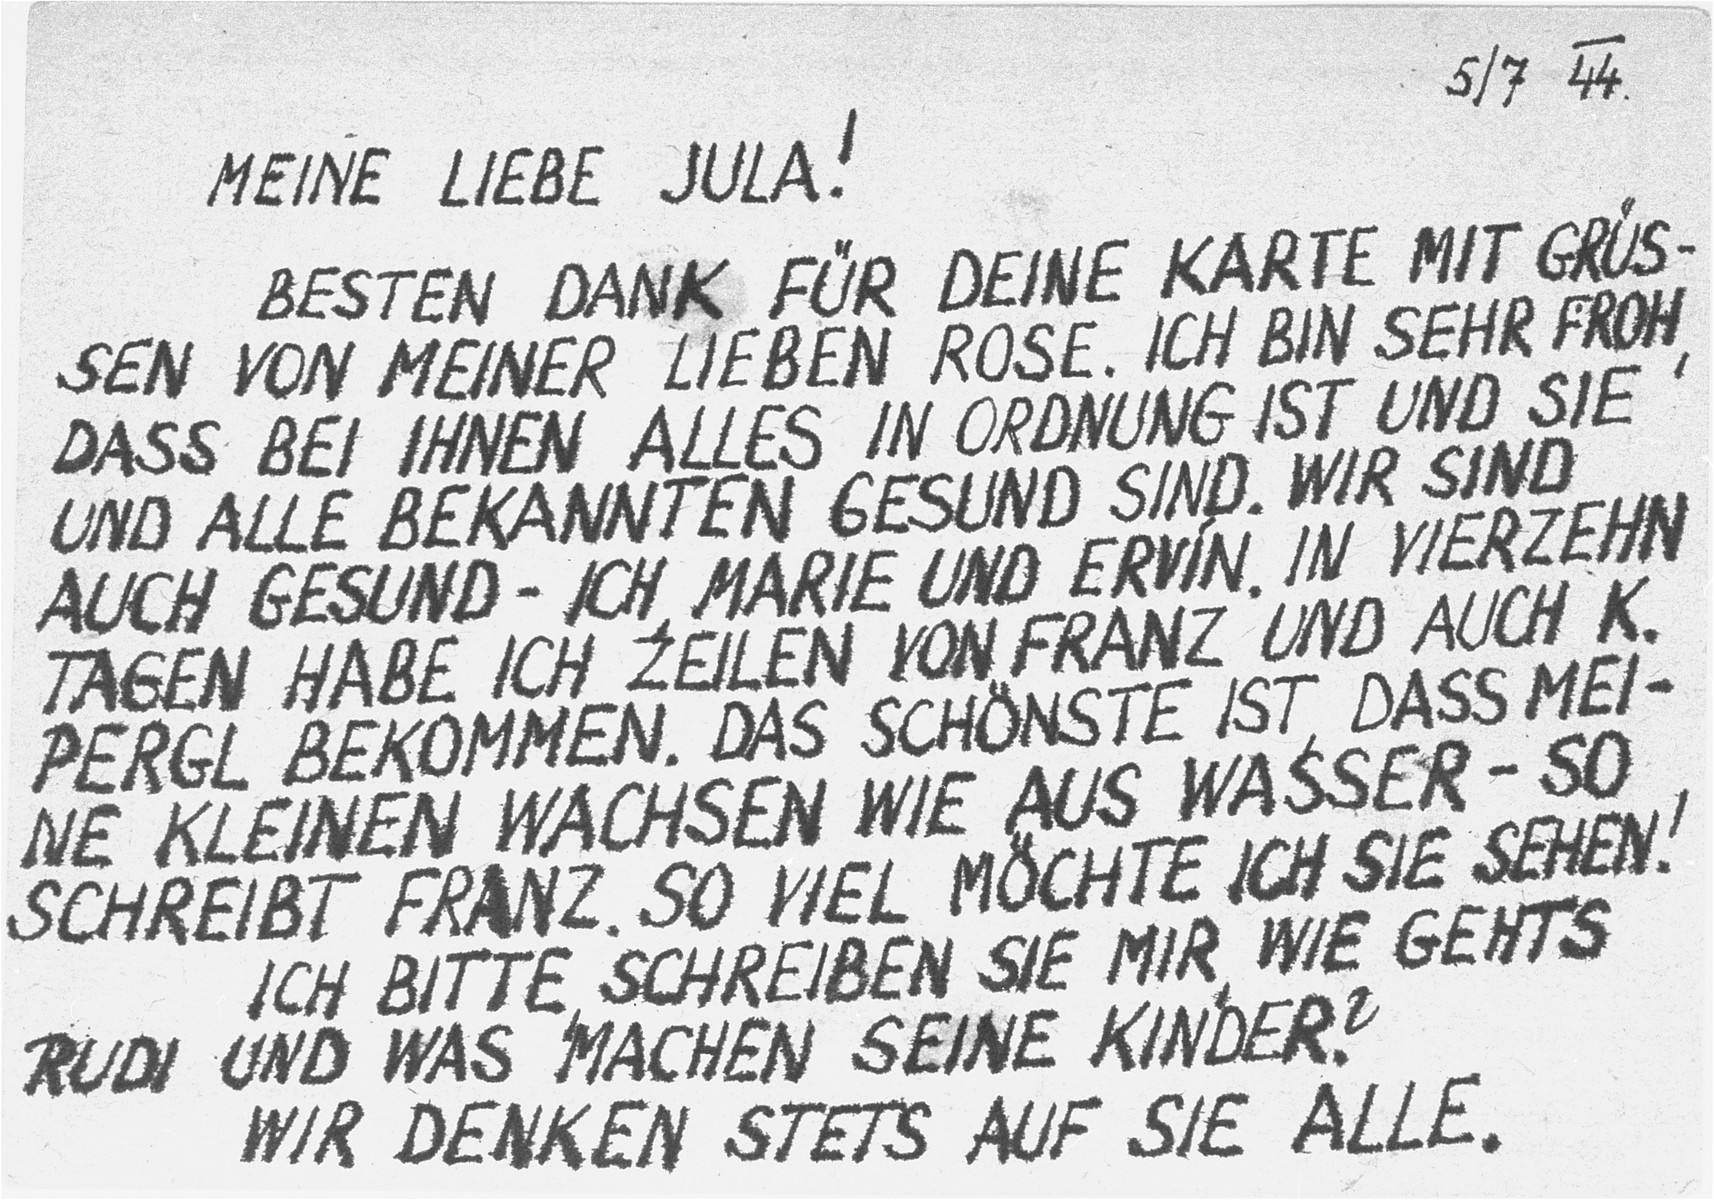 The back of a postcard sent from Iva Ledec, a German Jewish prisoner in Theresienstadt, to Juliana Behounek.  

It reads: "My Dear Jula!  Many thanks for your card with greetings from my dear Rose.  I am very happy that everything with you is in order and that all of you are healthy.  We are also well - I, Marie, and Ervin. In the past two weeks, I also received some lines from Franz and also K. Pergl.  Franz wrote me the best news - my little ones are growing like crazy.  I would like to see them so much! Please write and tell me about Rudi and his children?  We think often of you all."